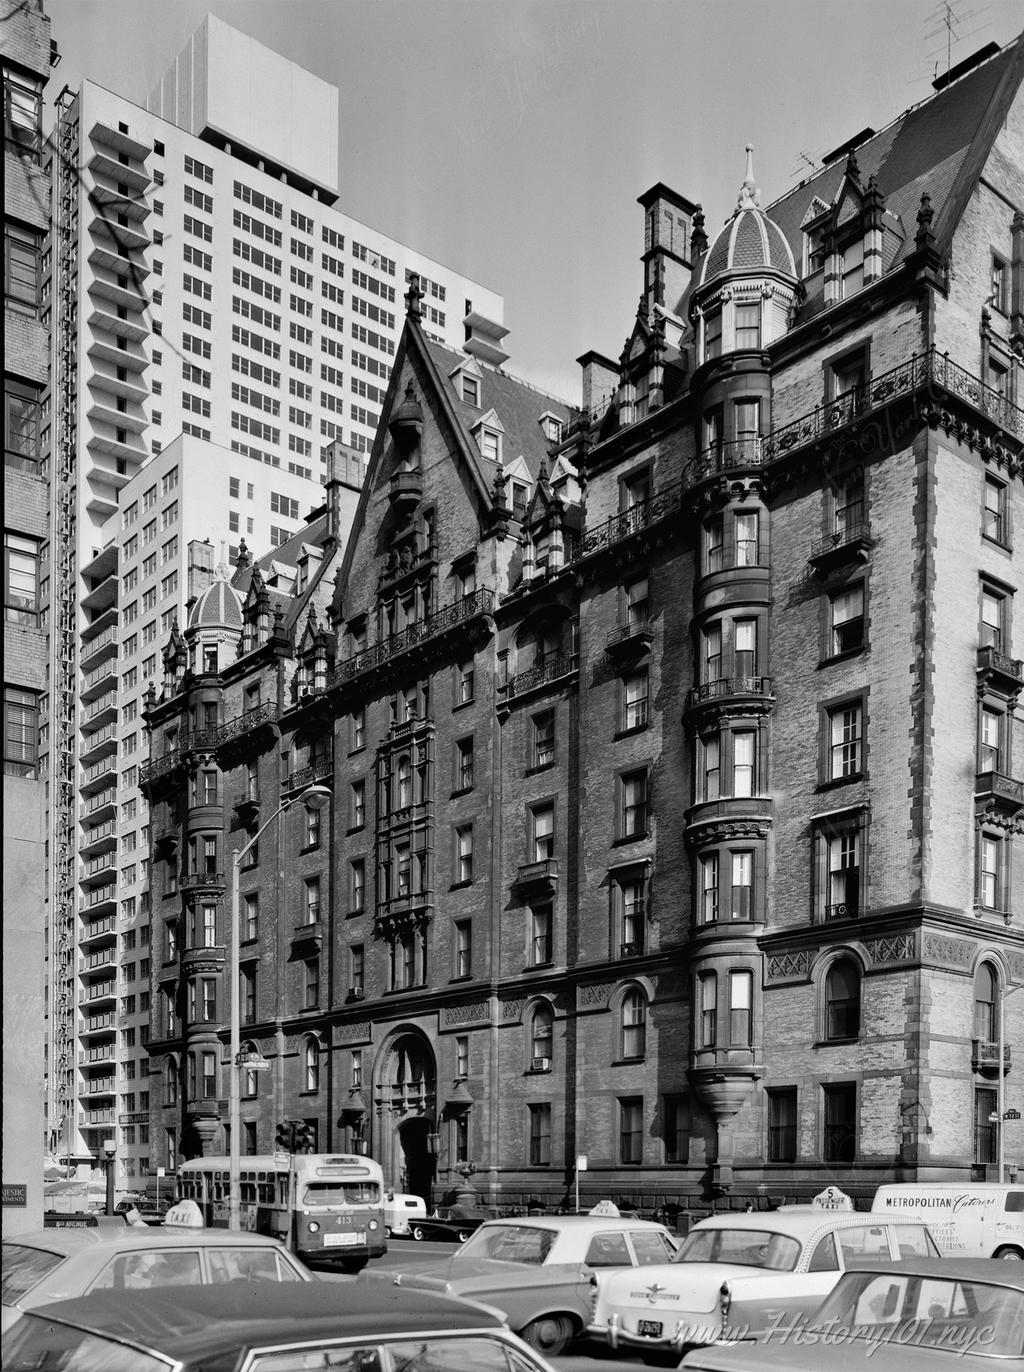 Photograph of the The Dakota Apartments taken from a corner in Central Park West.